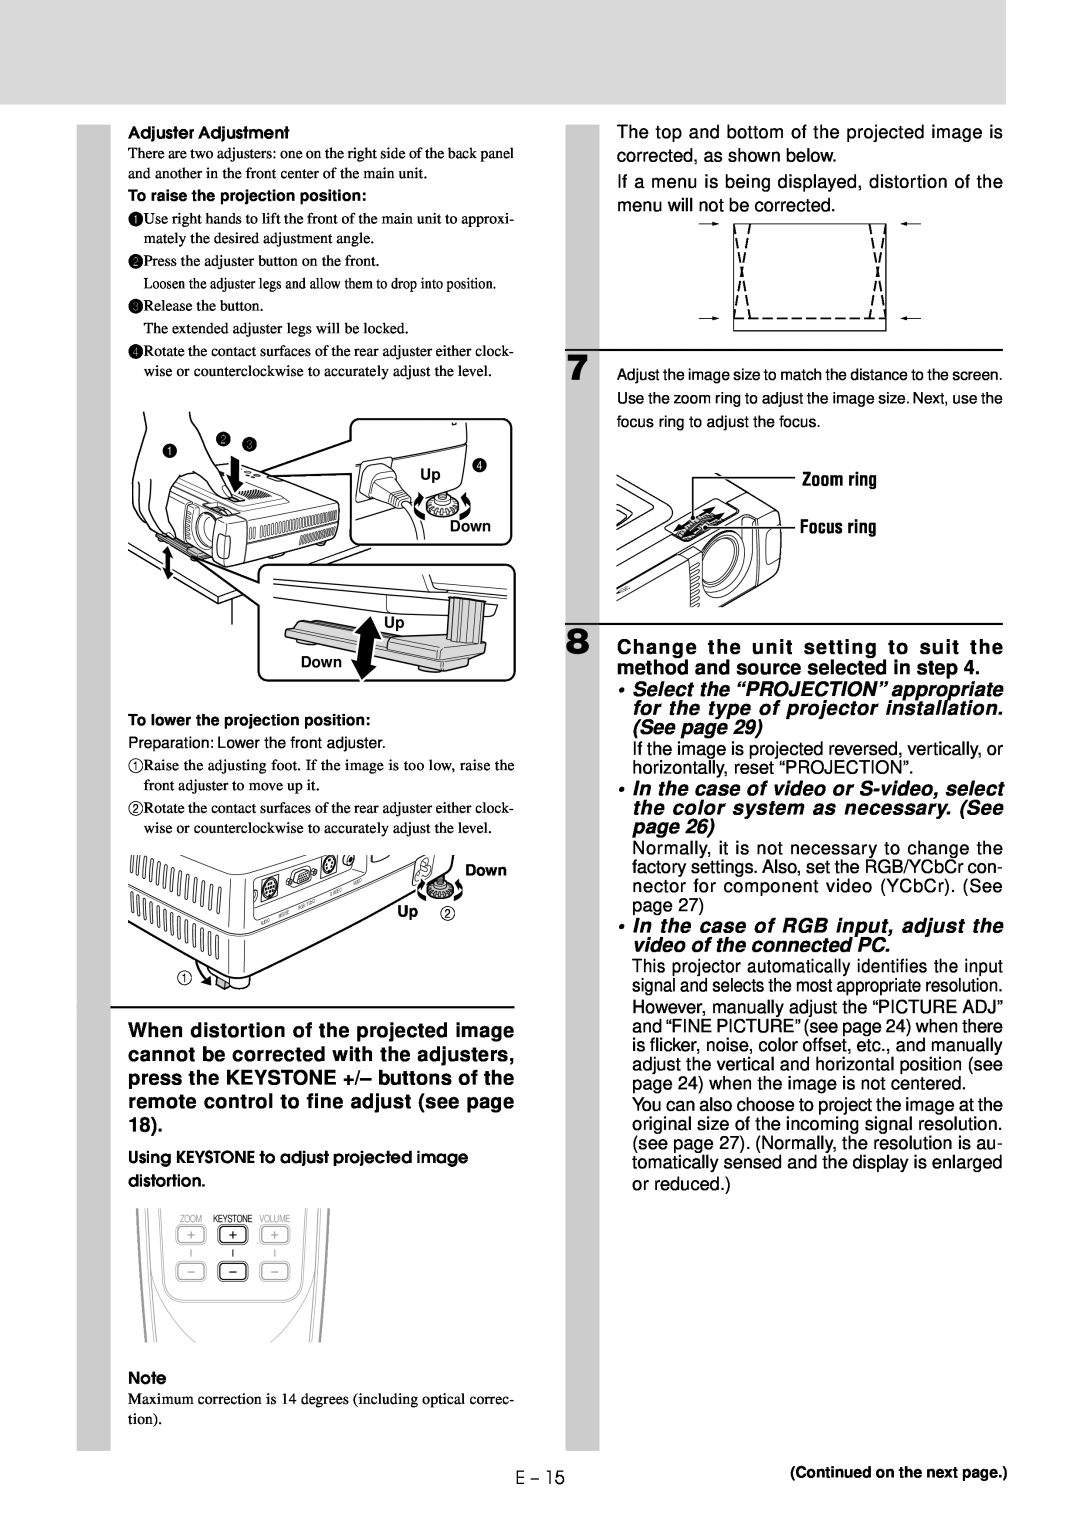 Mitsubishi Electronics XD20A user manual In the case of RGB input, adjust the video of the connected PC 